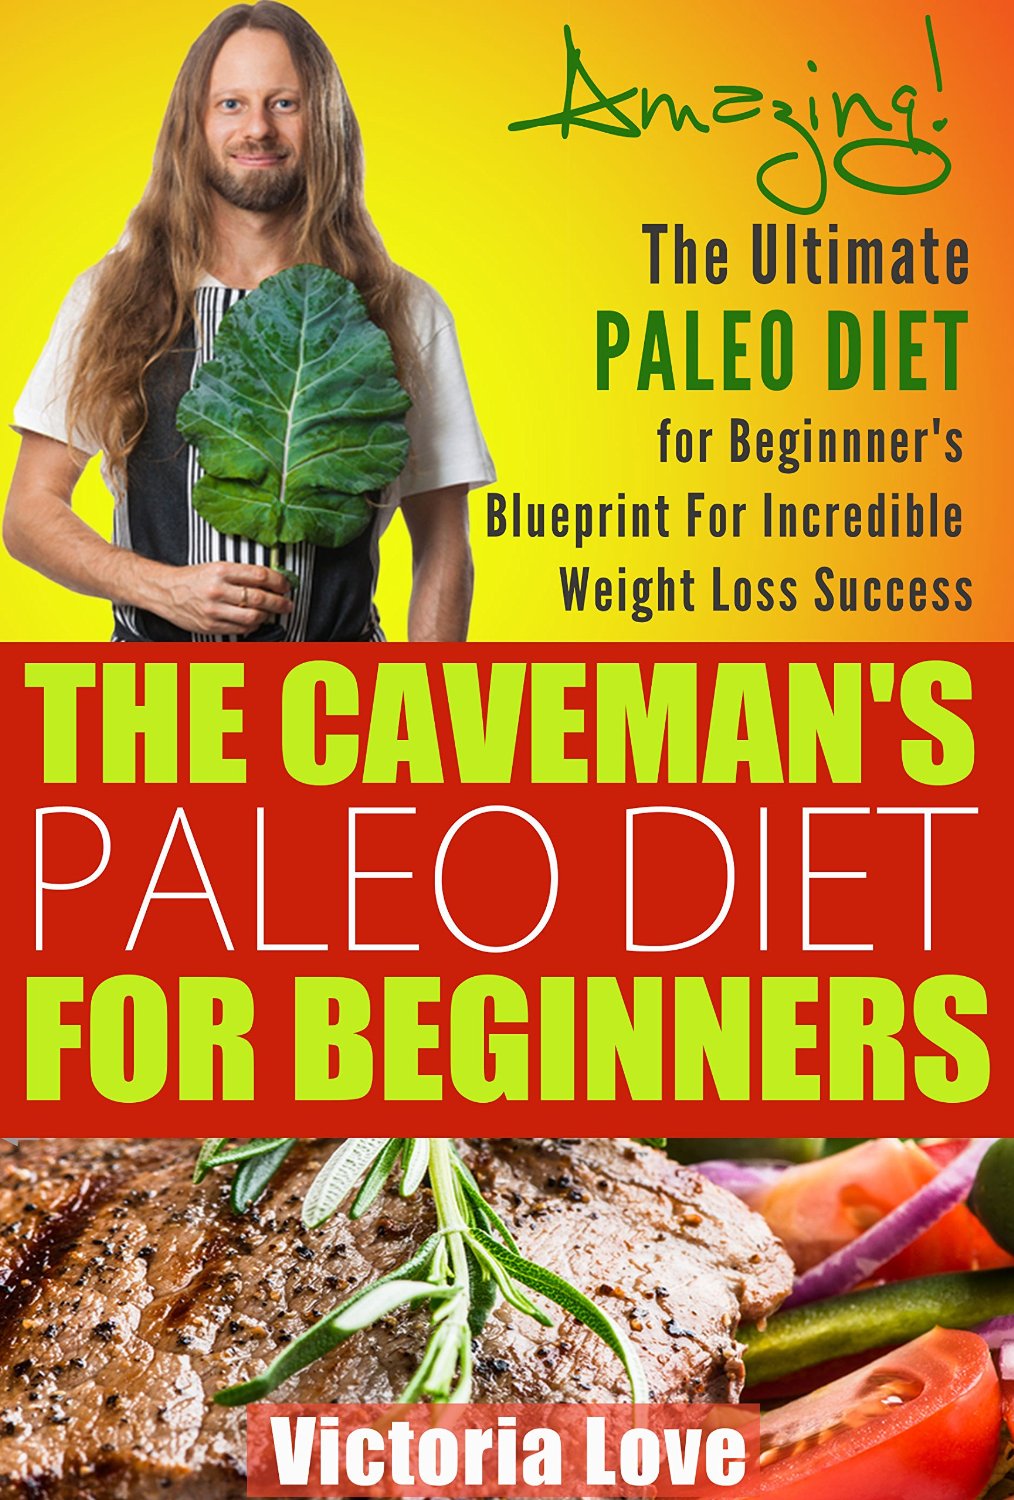 Paleo: The Caveman’s Paleo Diet For Beginners: Amazing! The Ultimate Paleo Diet for Beginner’s Blueprint For Incredible Weight Loss Success by Victoria Love